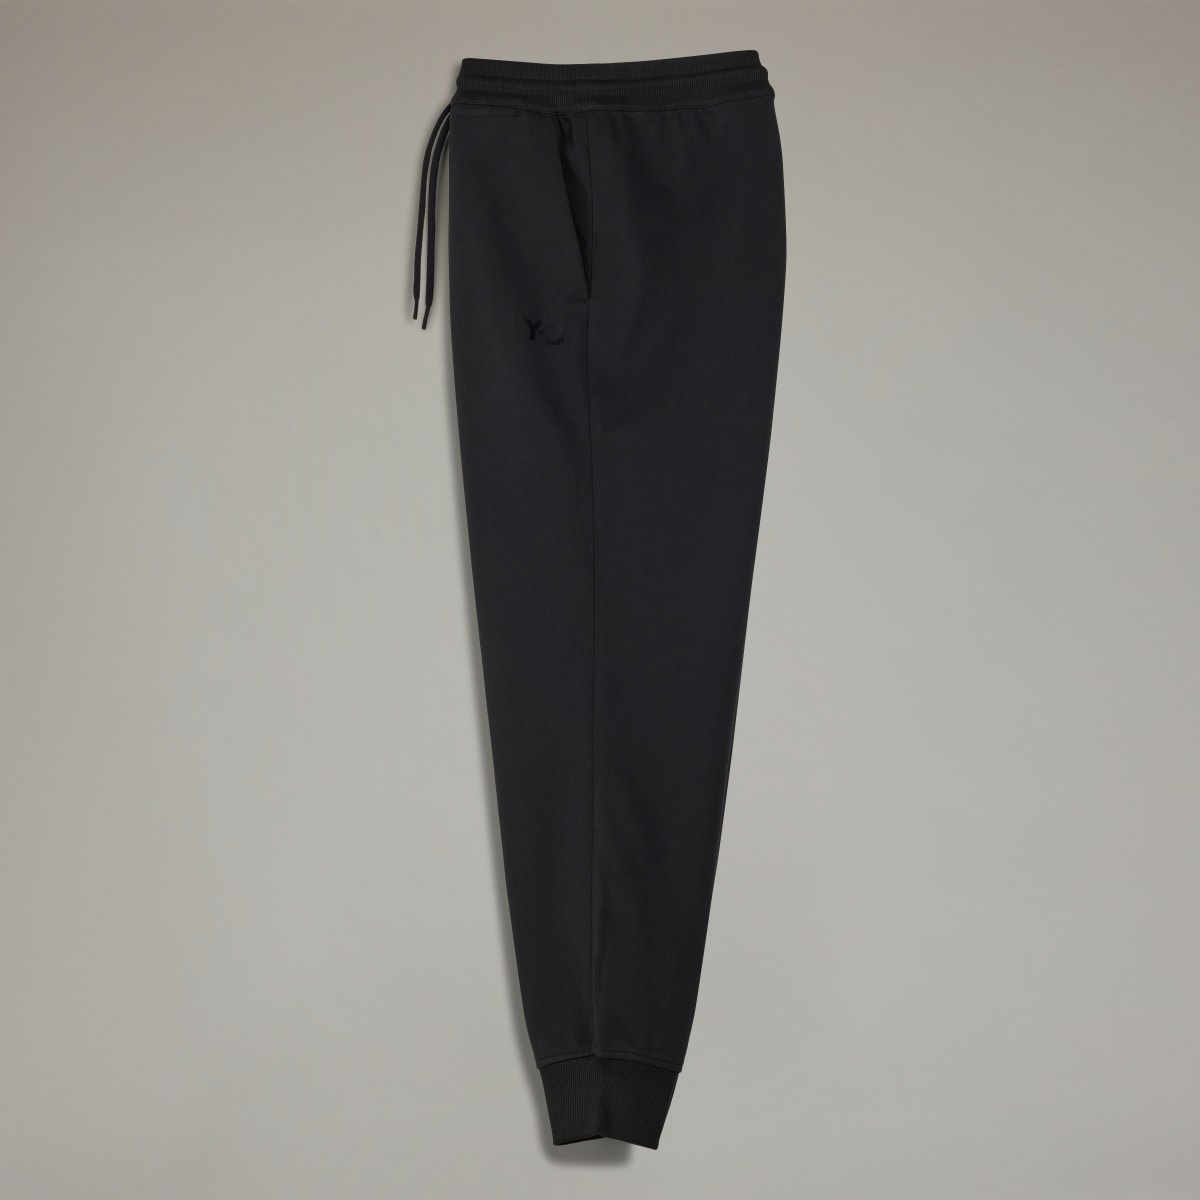 Adidas Y-3 French Terry Cuffed Pants. 5